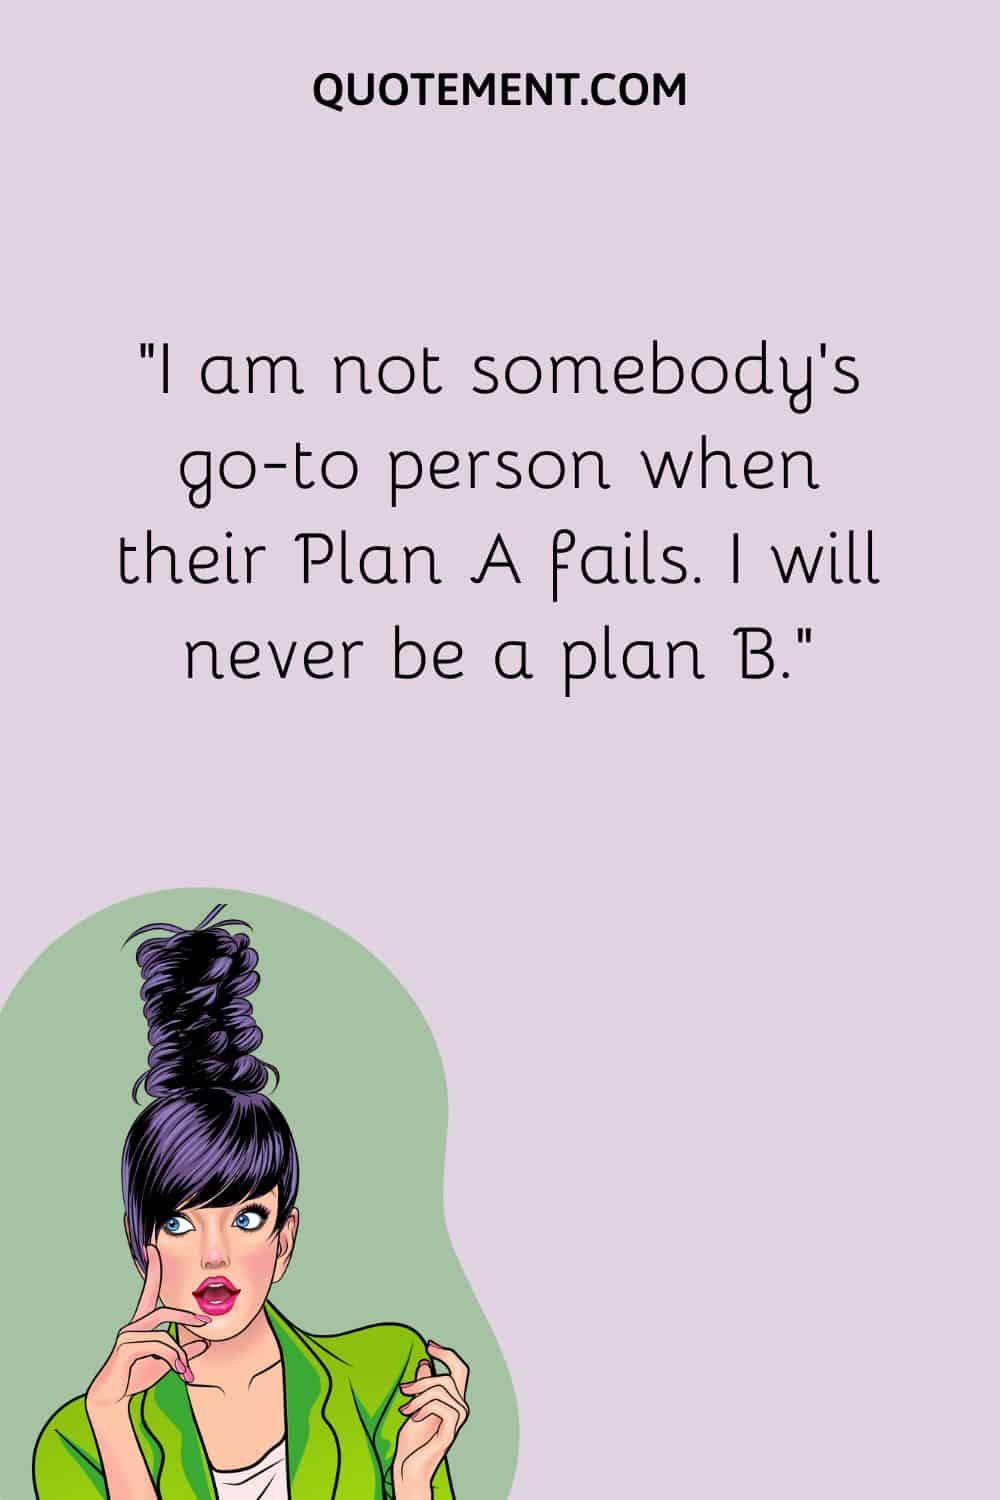 I am not somebody’s go-to person when their Plan A fails